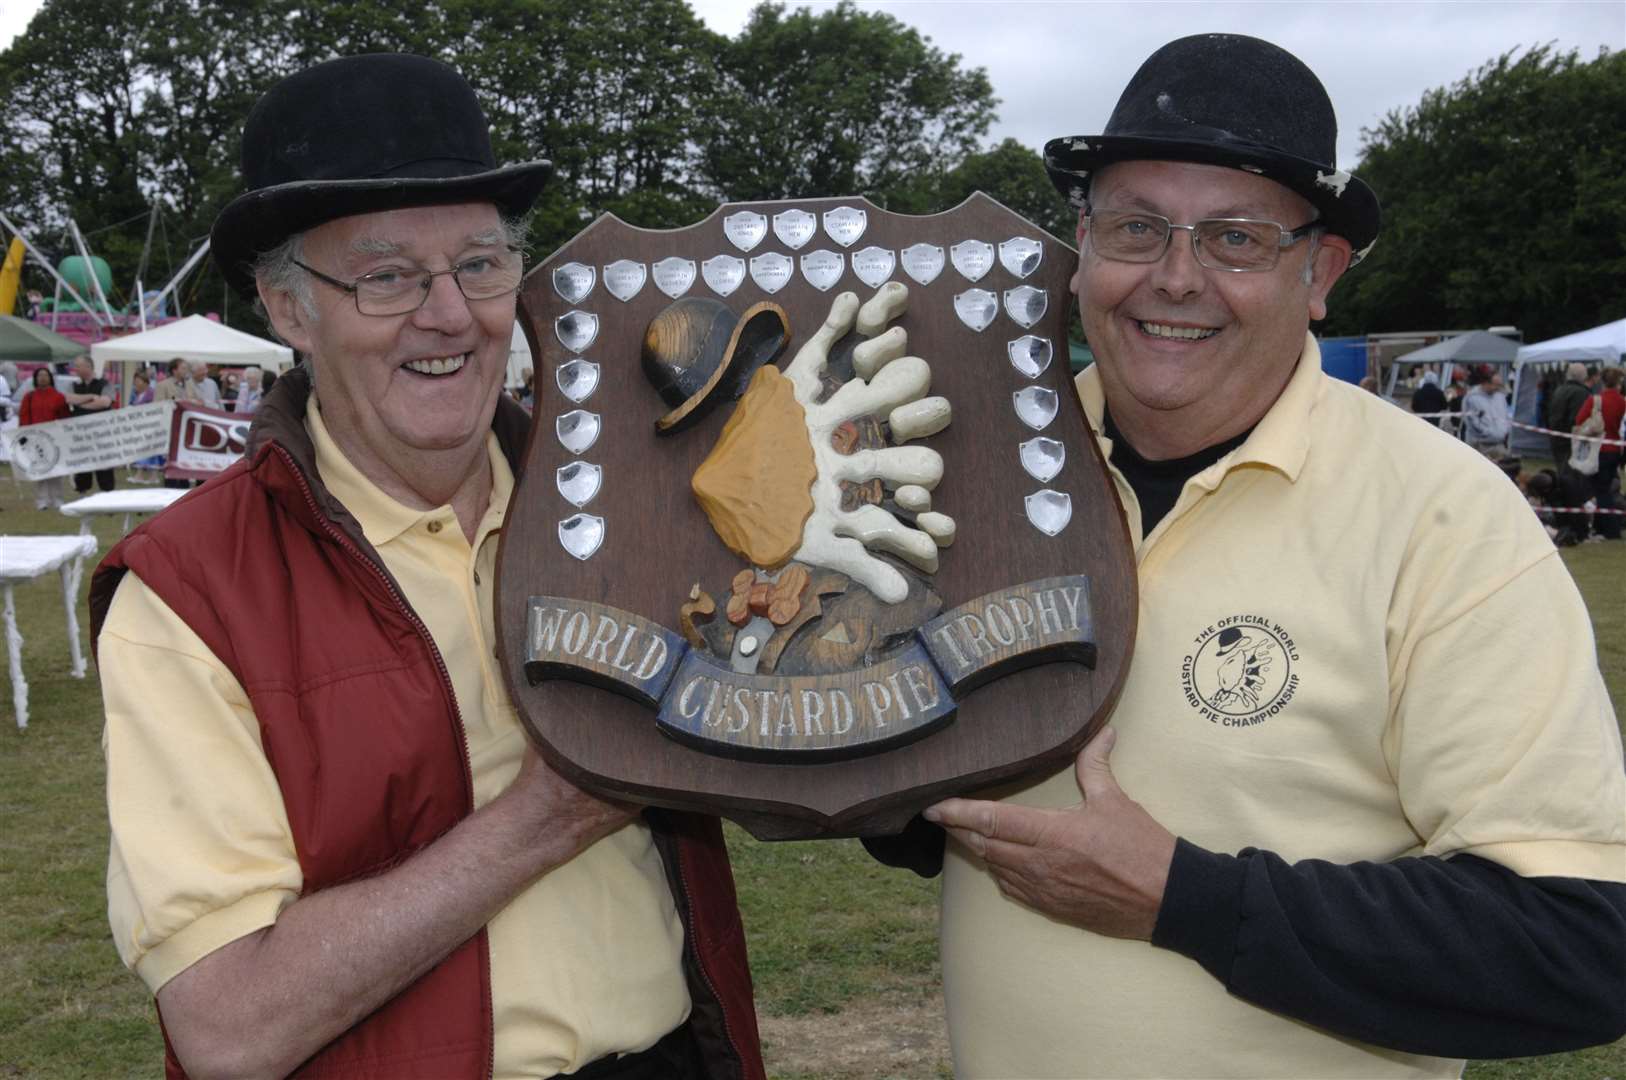 Brian Mortimer with fellow organiser Mike Fitzgerald at the World Custard Pie Championships